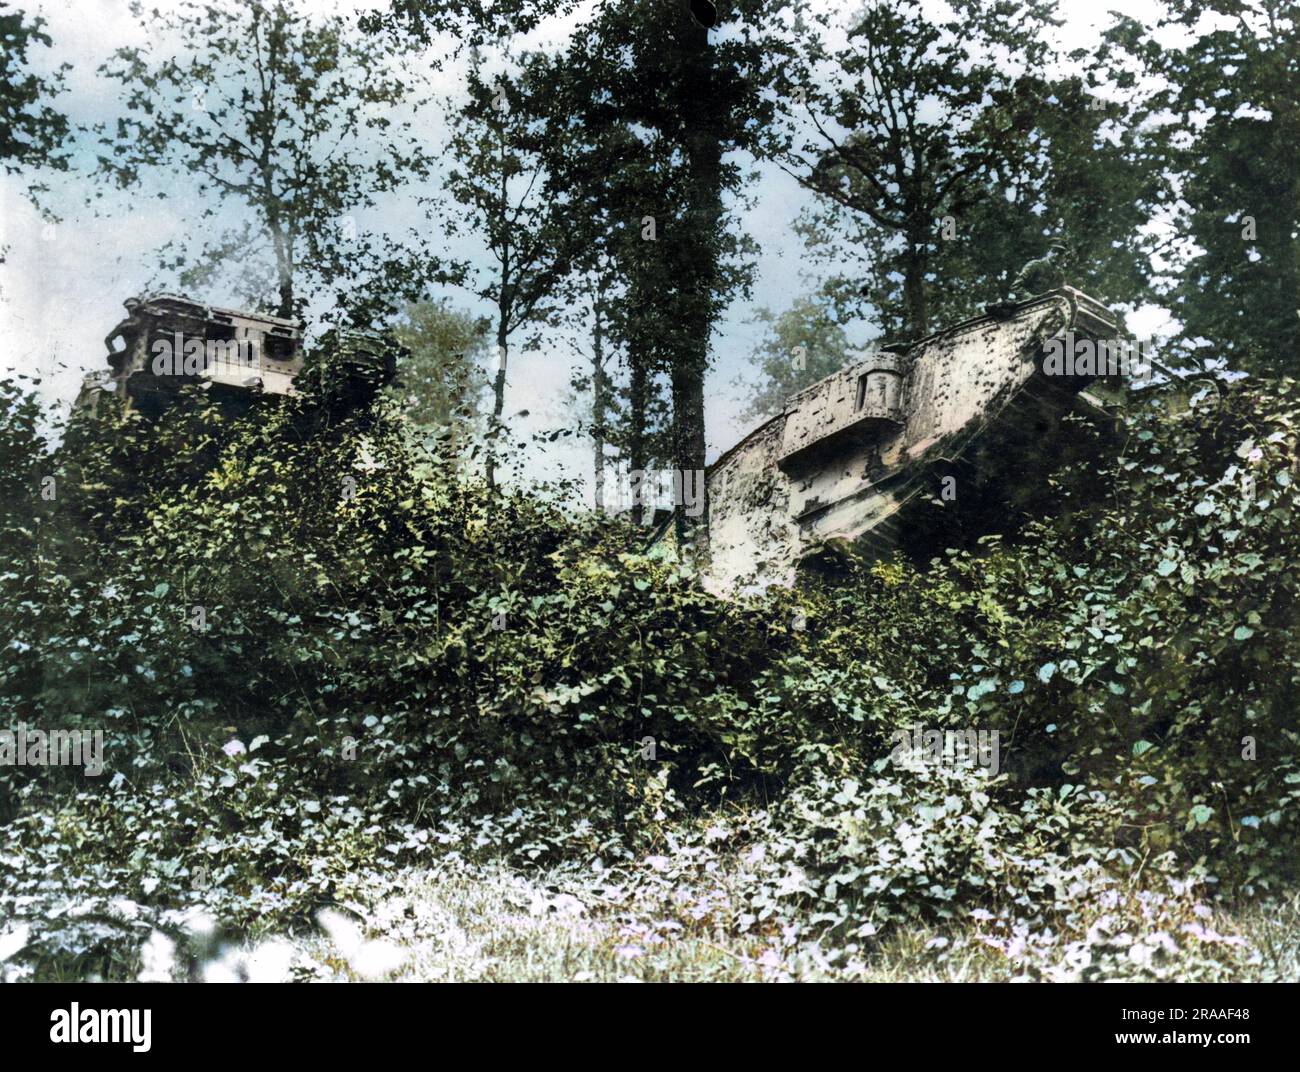 Two British tanks passing through Oosthoek Wood, near Elverdinghe, Belgium, on the Western Front during the First World War.     Date: 11-Sep-17 Stock Photo